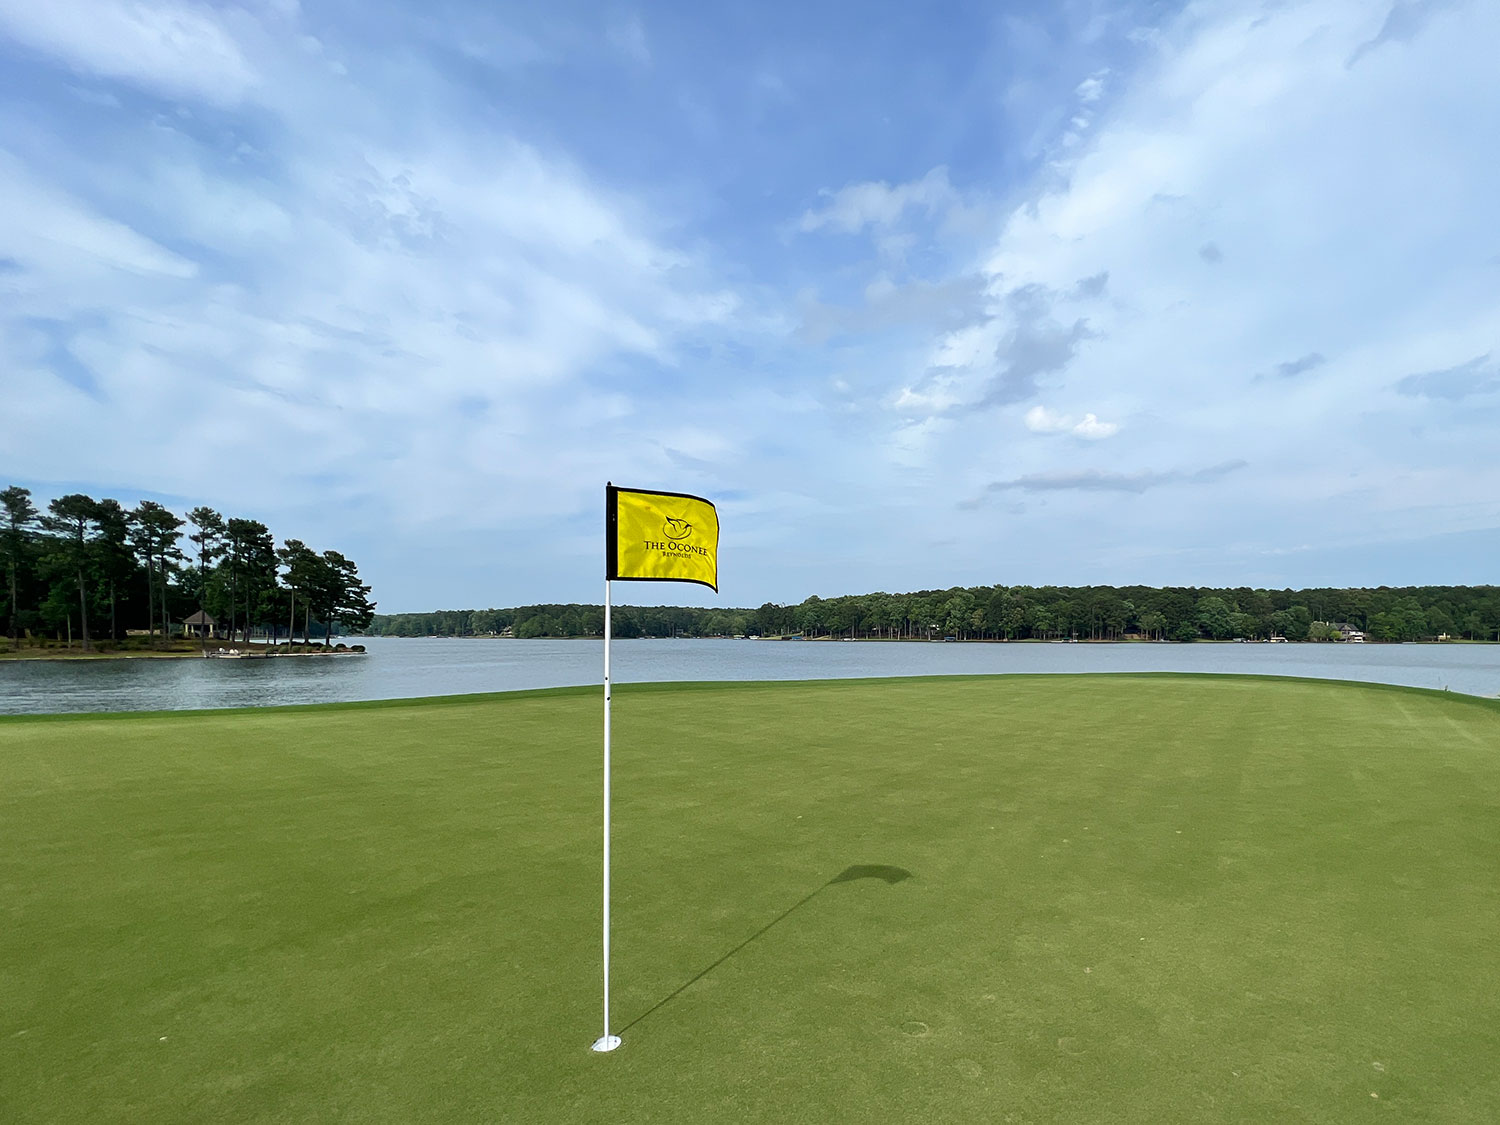 The view from the green on Hole 18 at The Oconee in Reynolds Lake Oconee, Georgia.